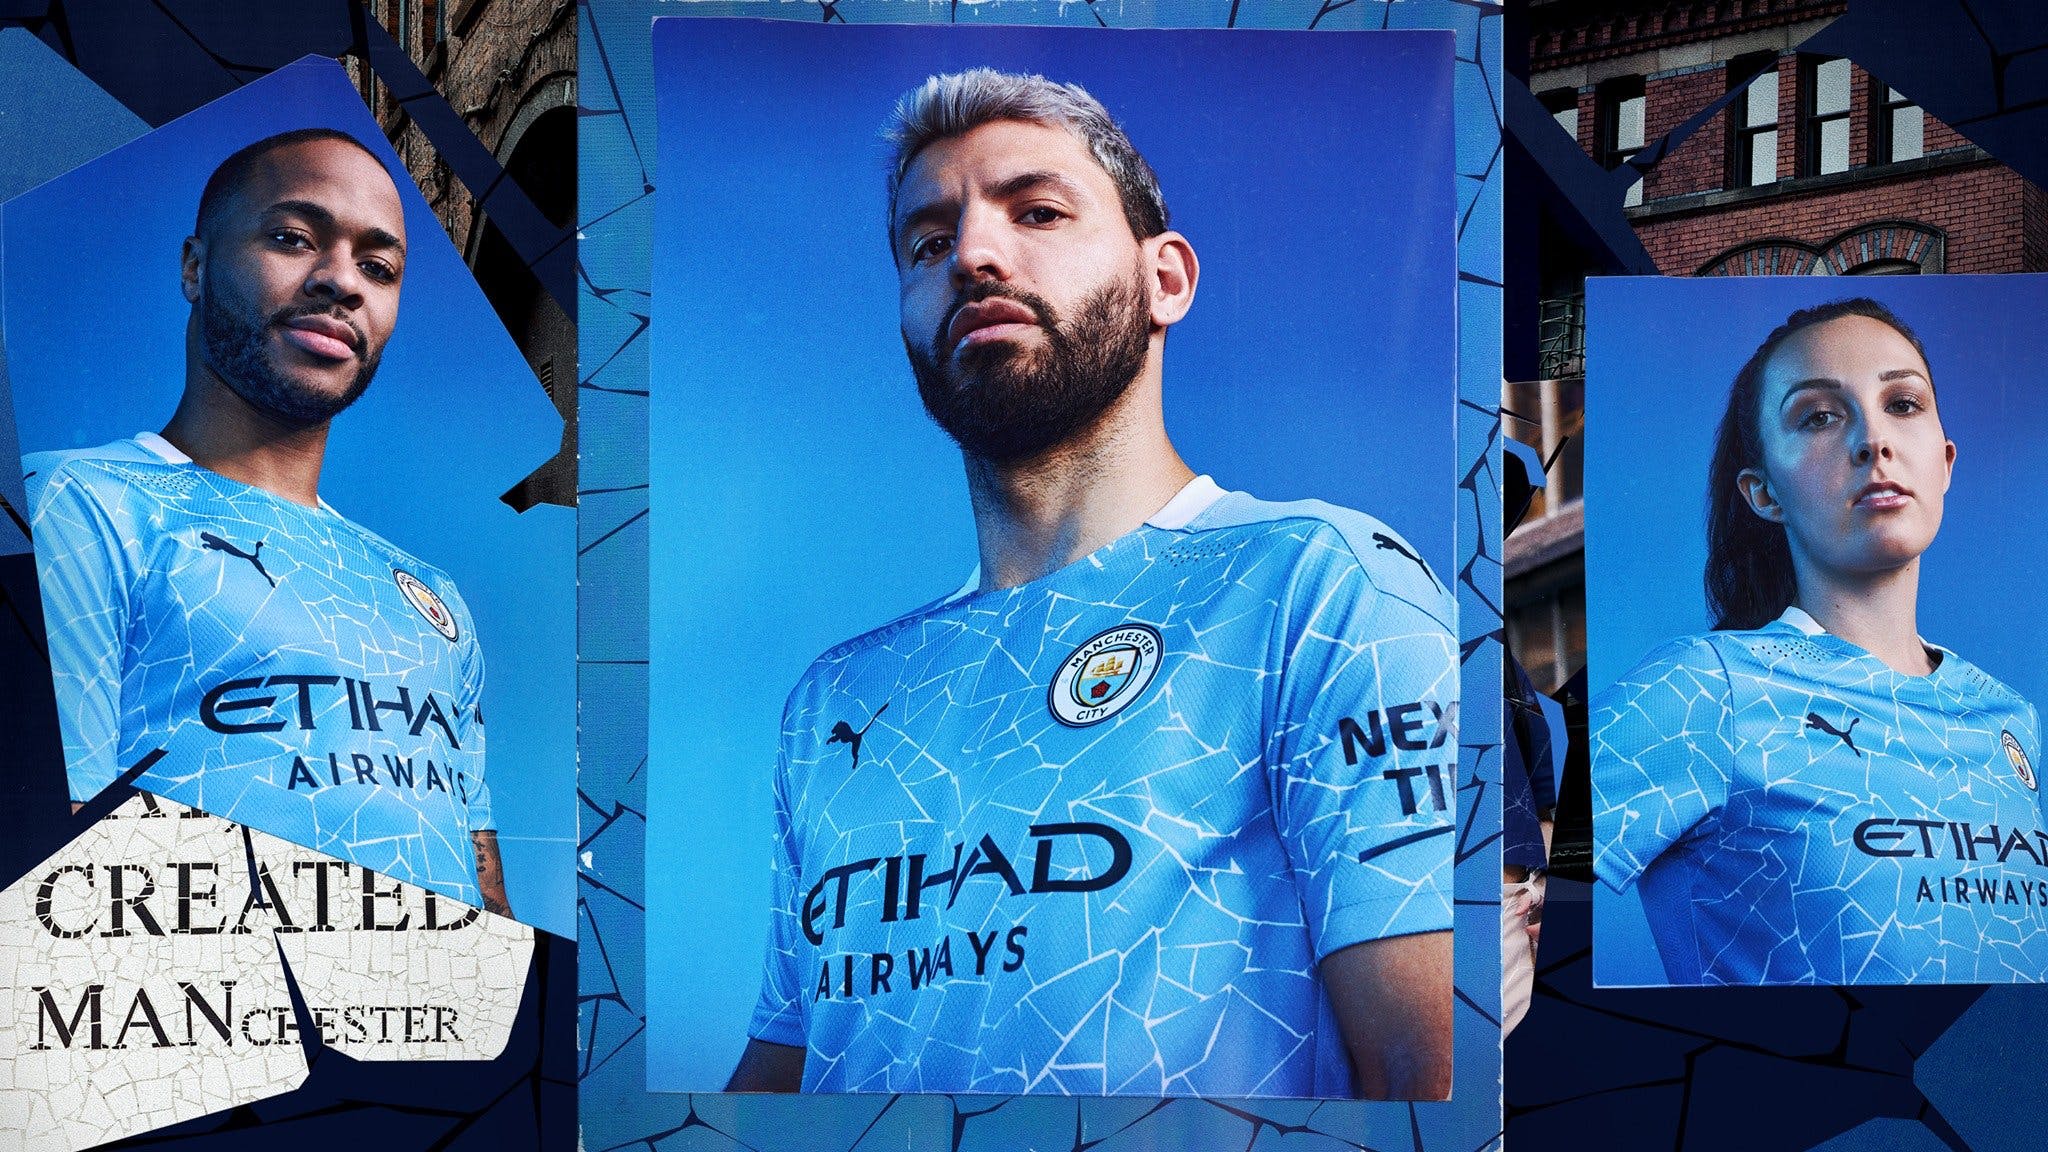 Leaked: 2021 2022 Man City Kit Details Illustrated Manchester City News, Analysis And More